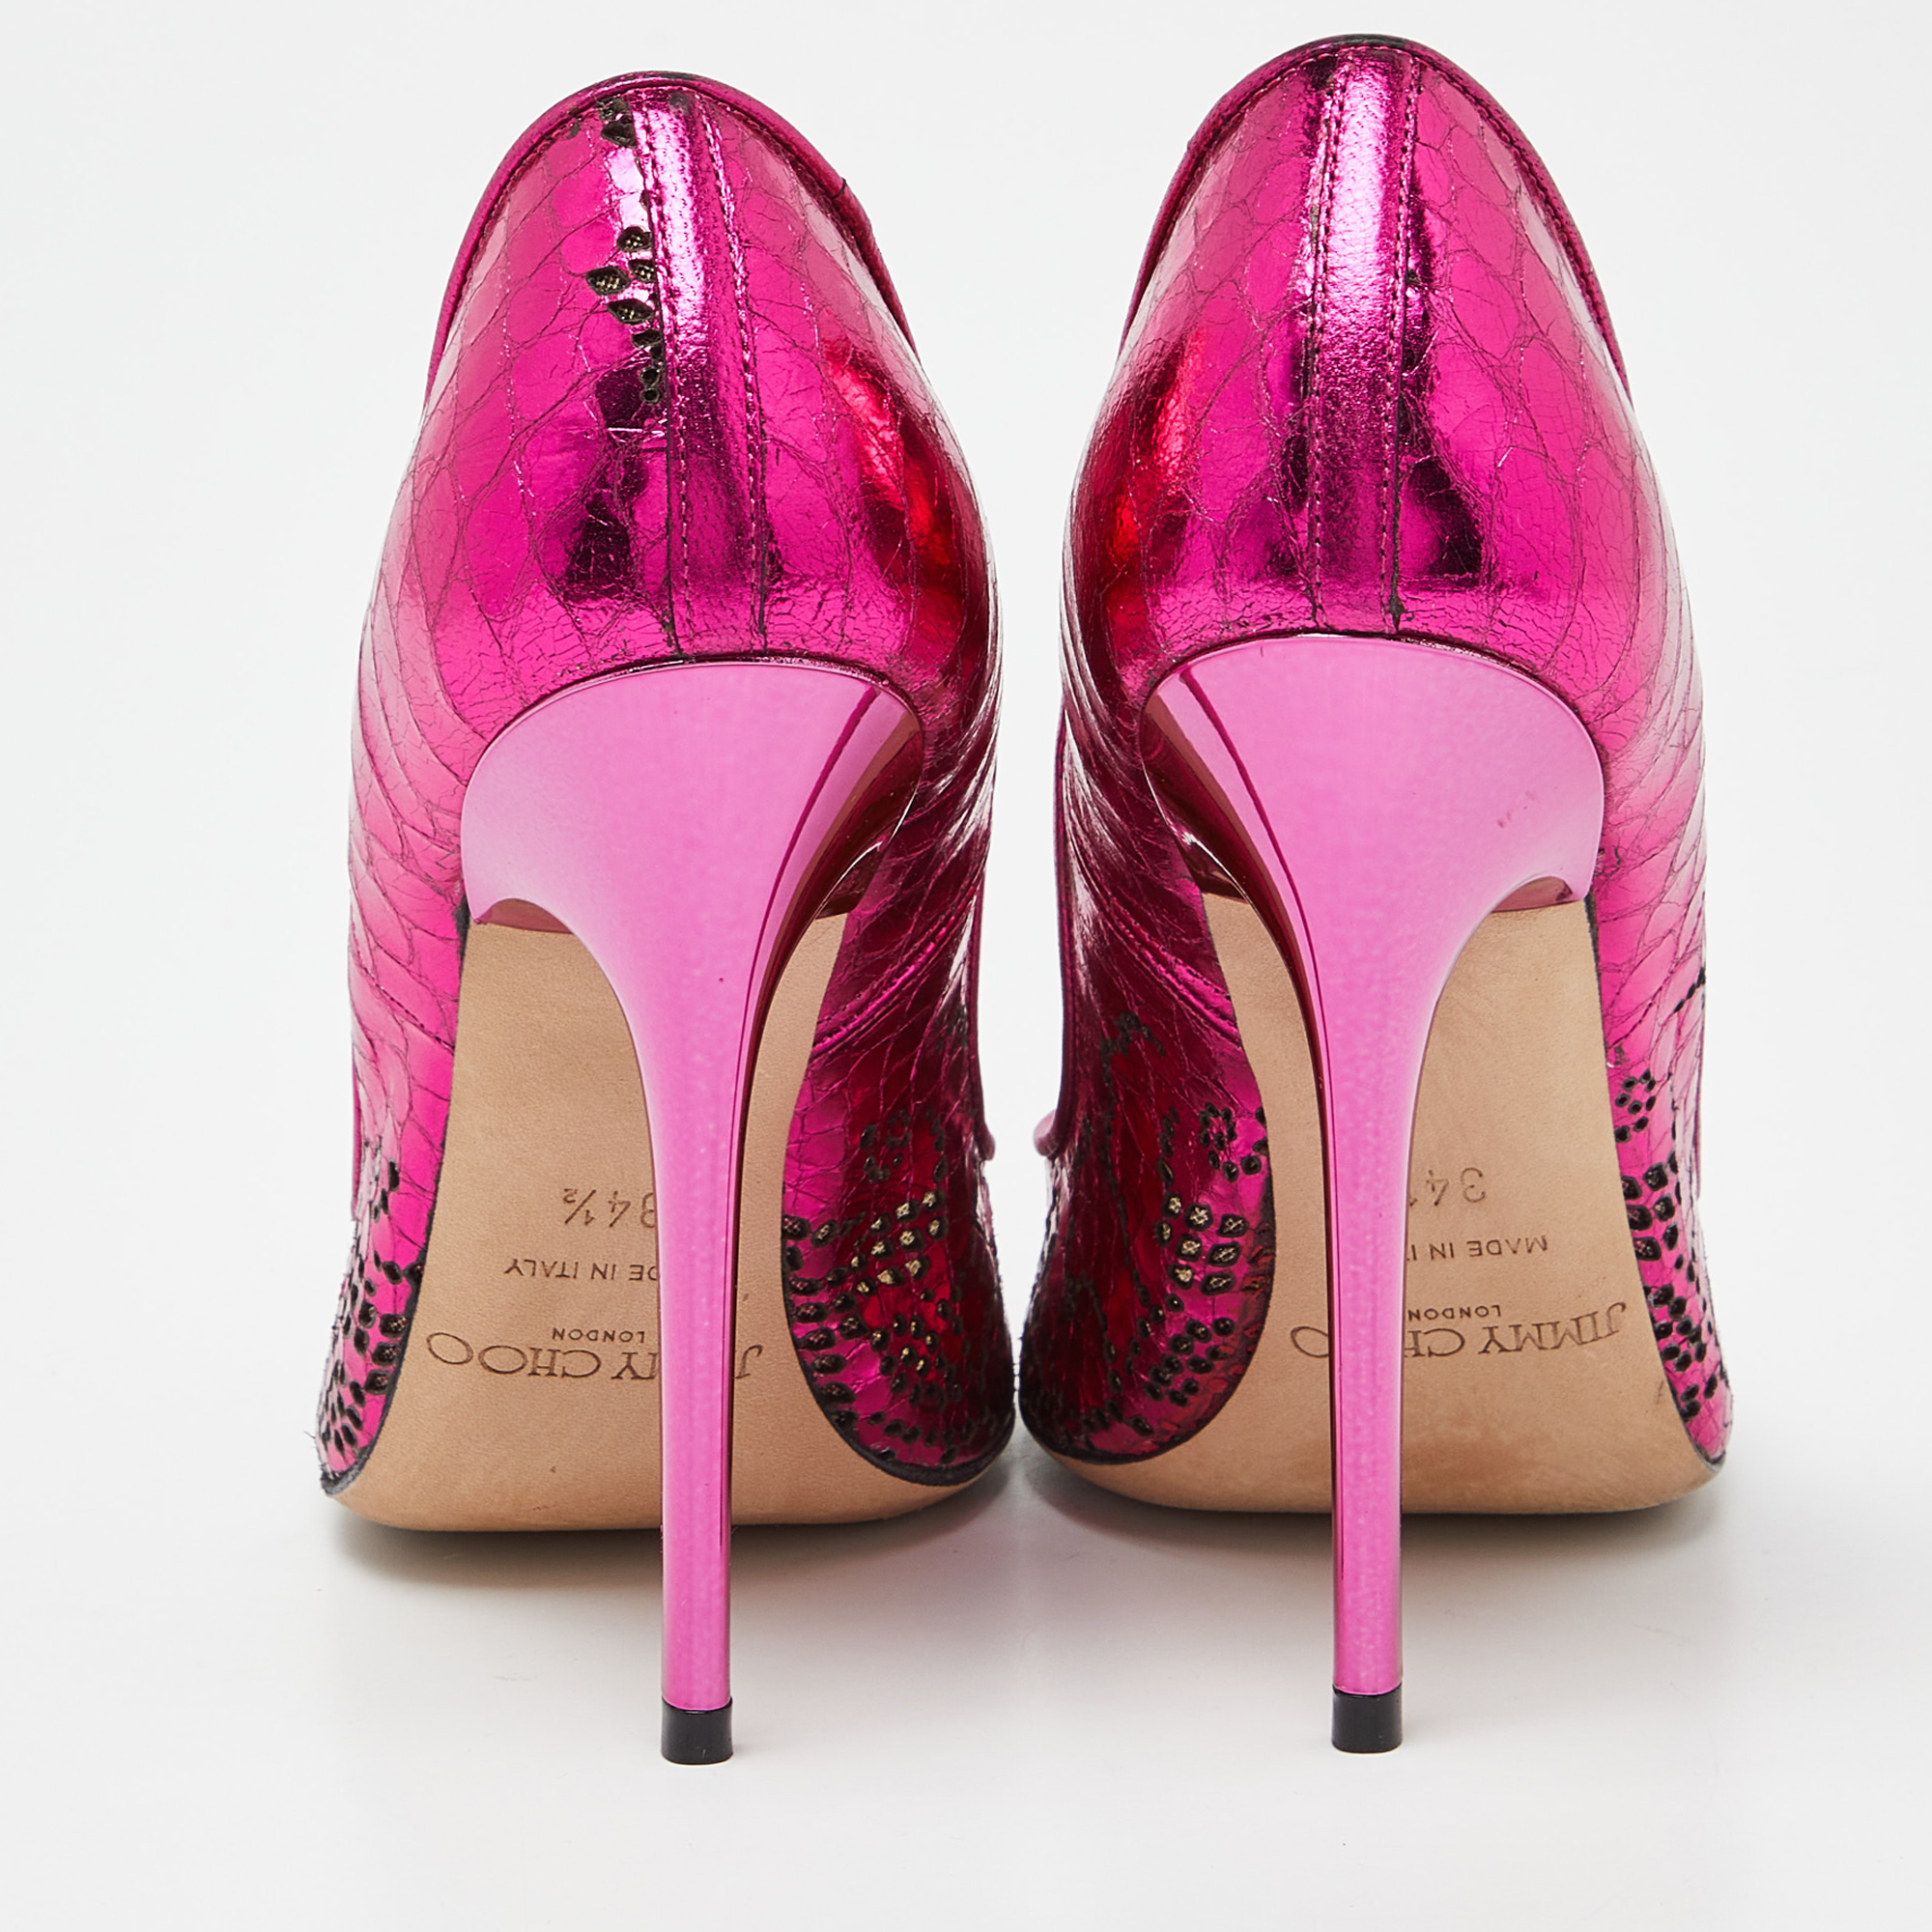 Jimmy Choo Fuchsia Snakeskin Effect Mirrored Leather ICONS Capsule Pumps Size 34.5